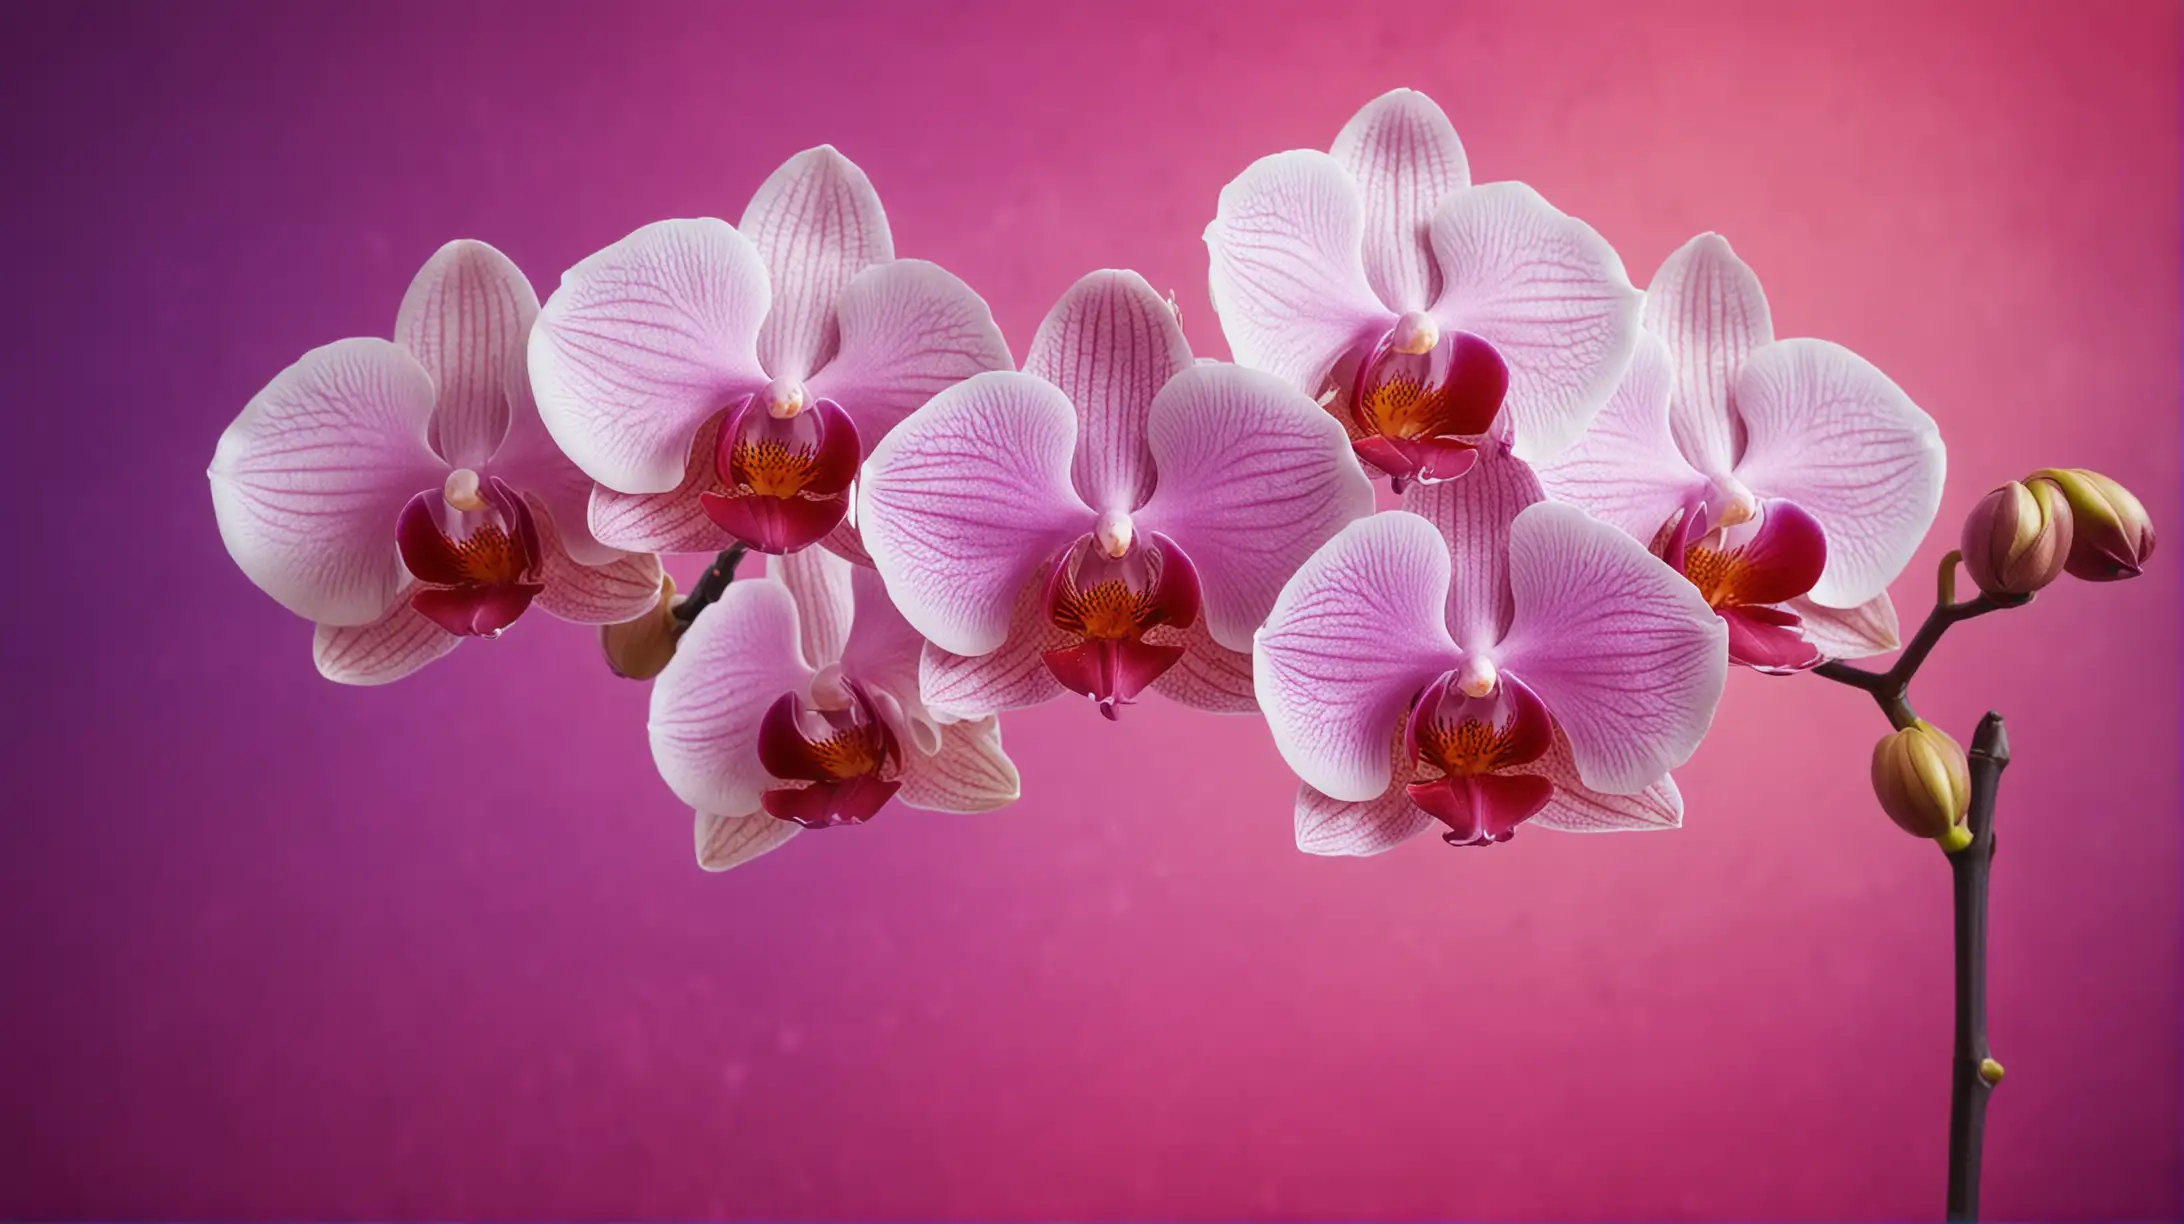 Vibrant Orchids Blooming Against Colorful Background